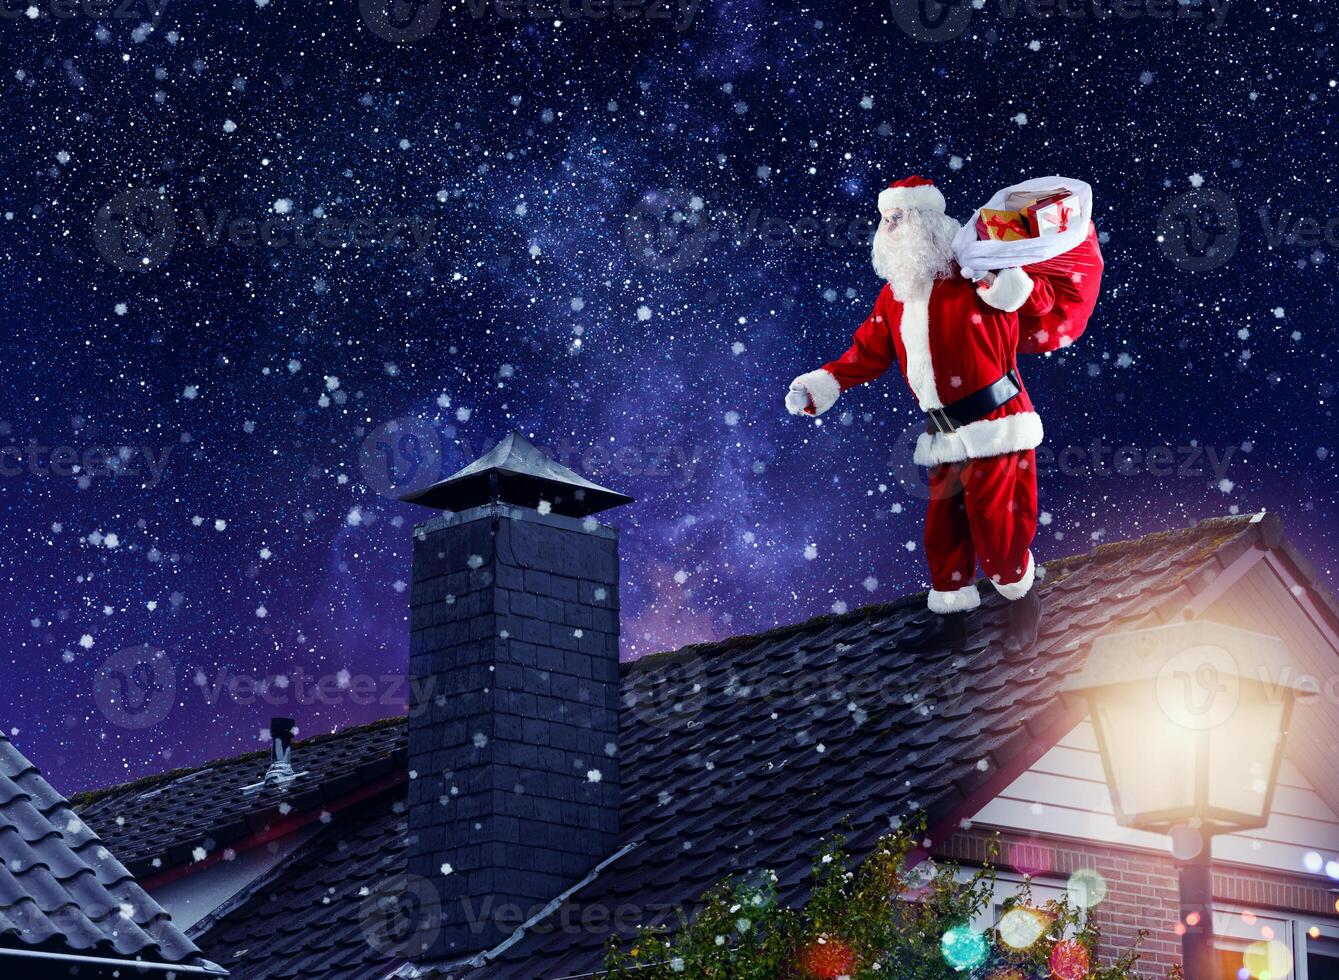 Santa claus ready to deliver presents for Christmas photo